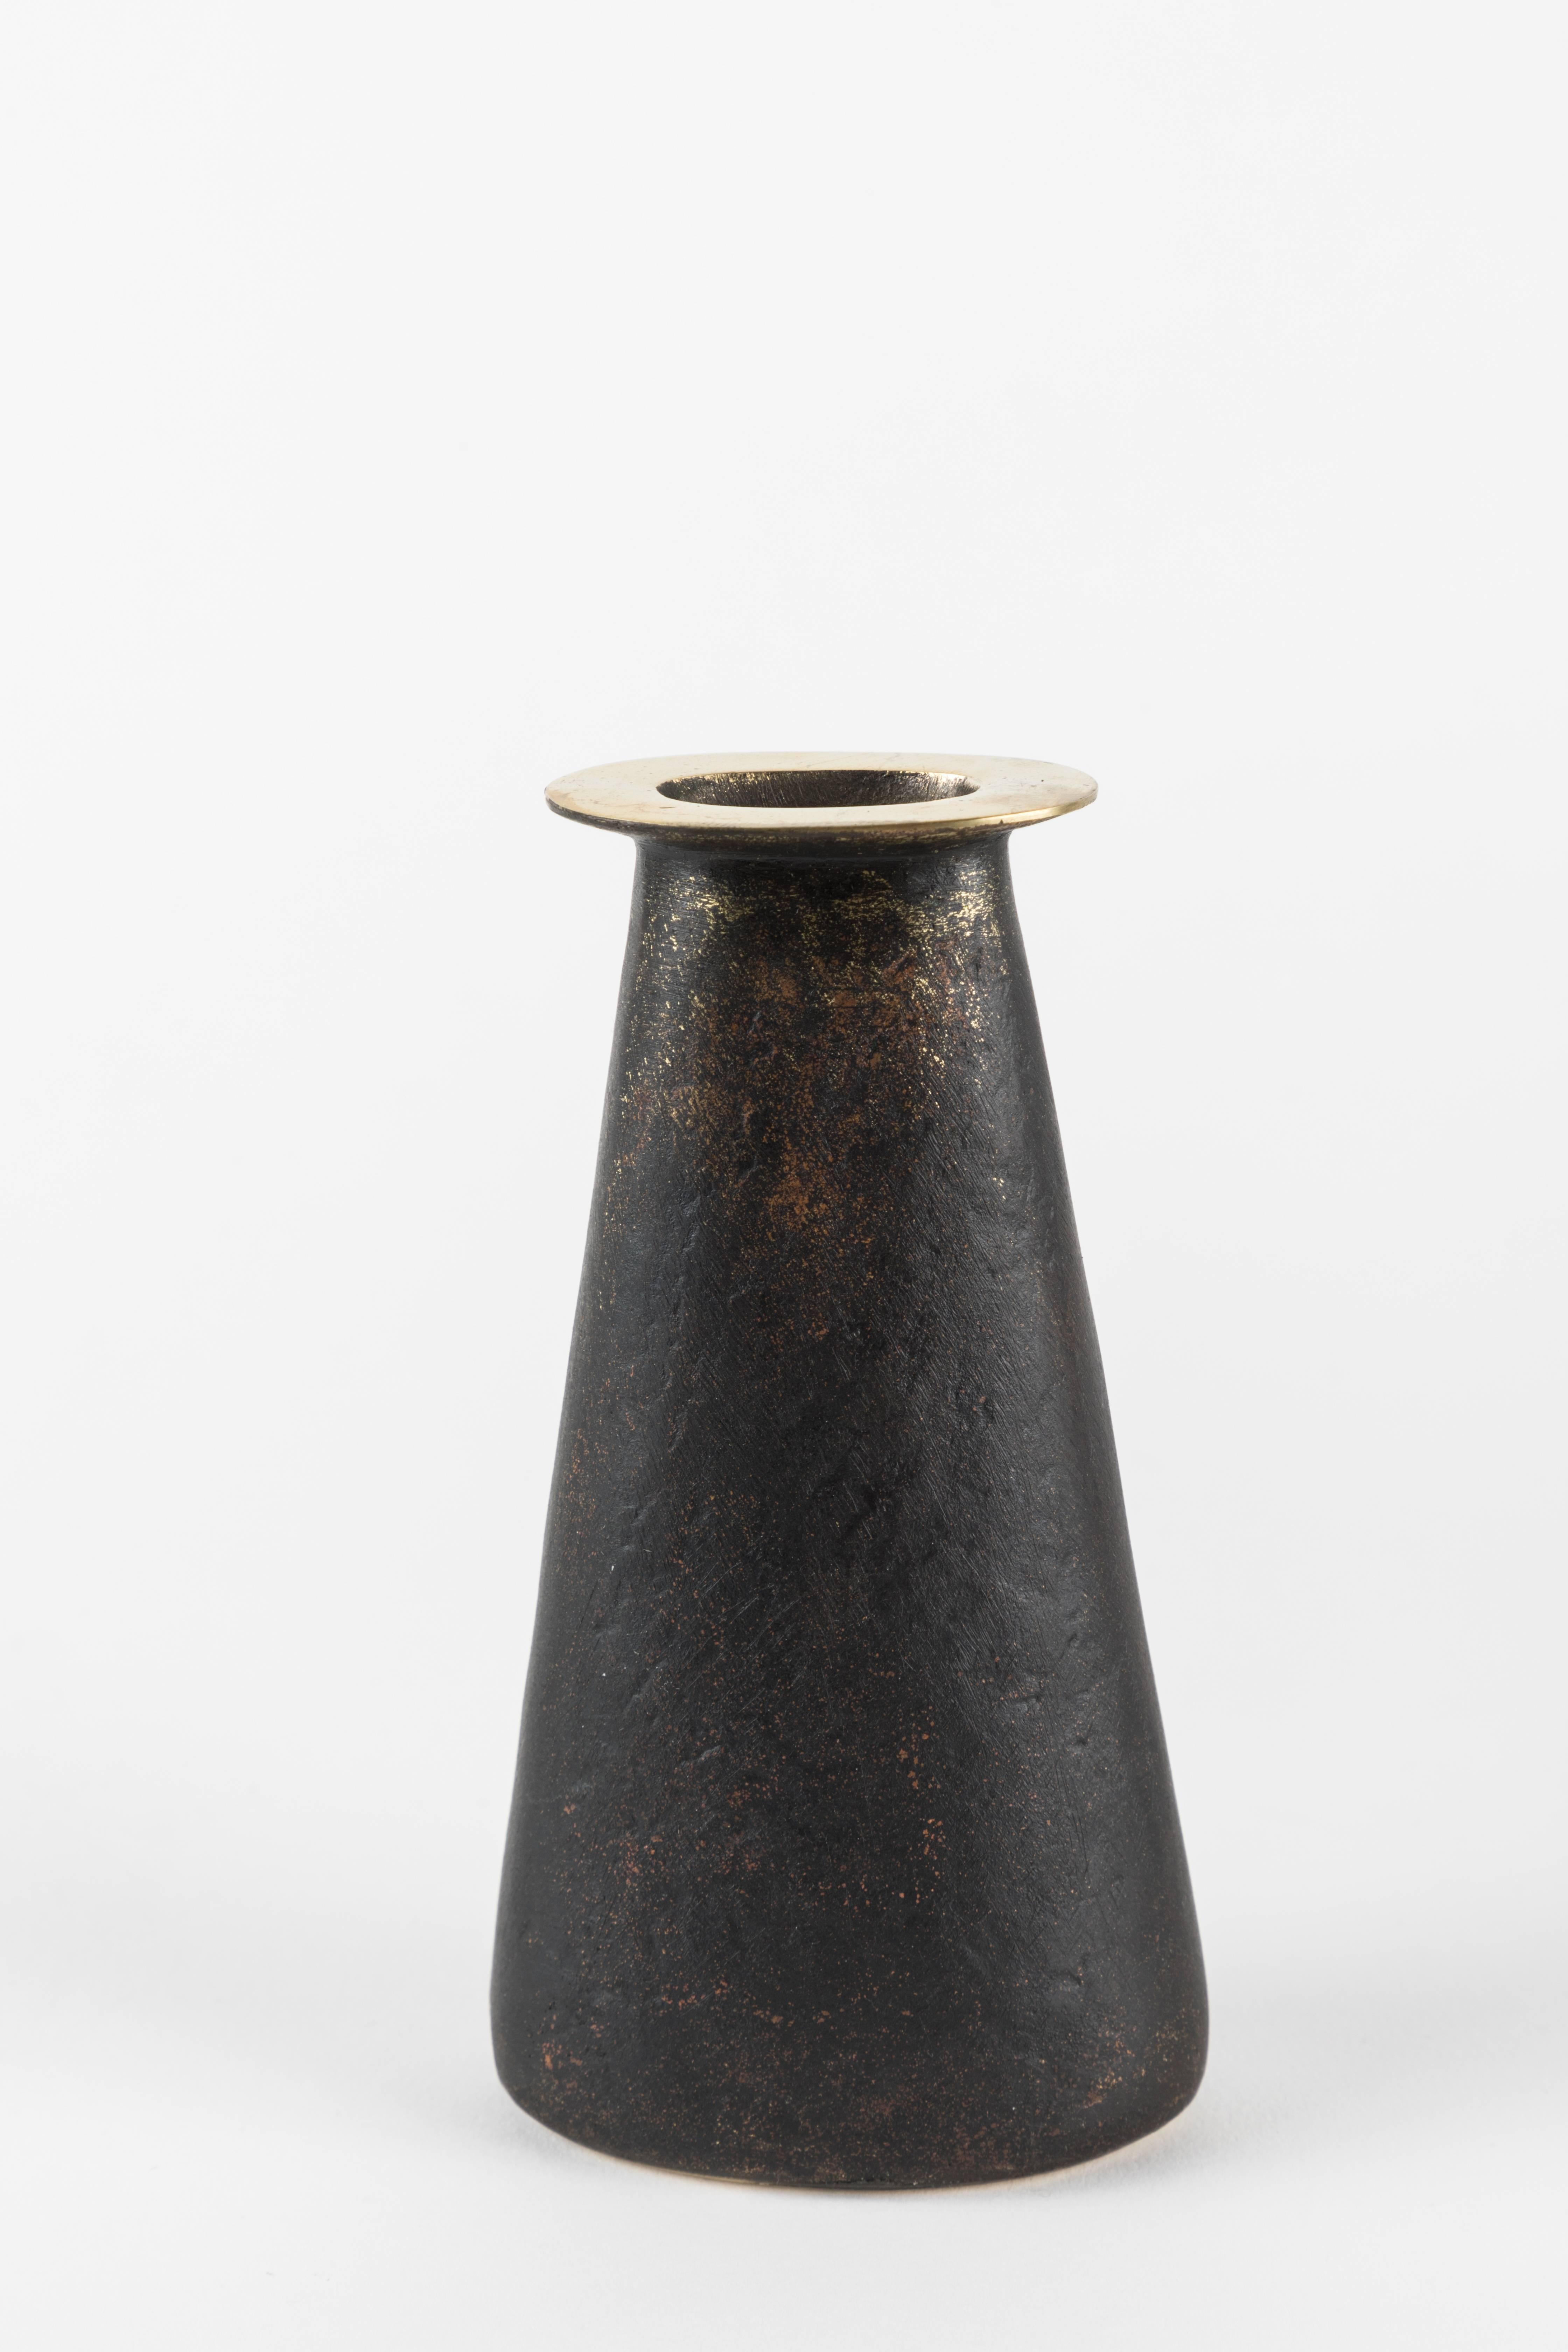 Carl Auböck model #3975 brass vase. Designed in the 1950s, this incredibly refined and sculptural Viennese vase is executed in polished and darkly patinated brass by Werkstätte Carl Auböck, Austria. 

Price is per item. Other Aubock vase models